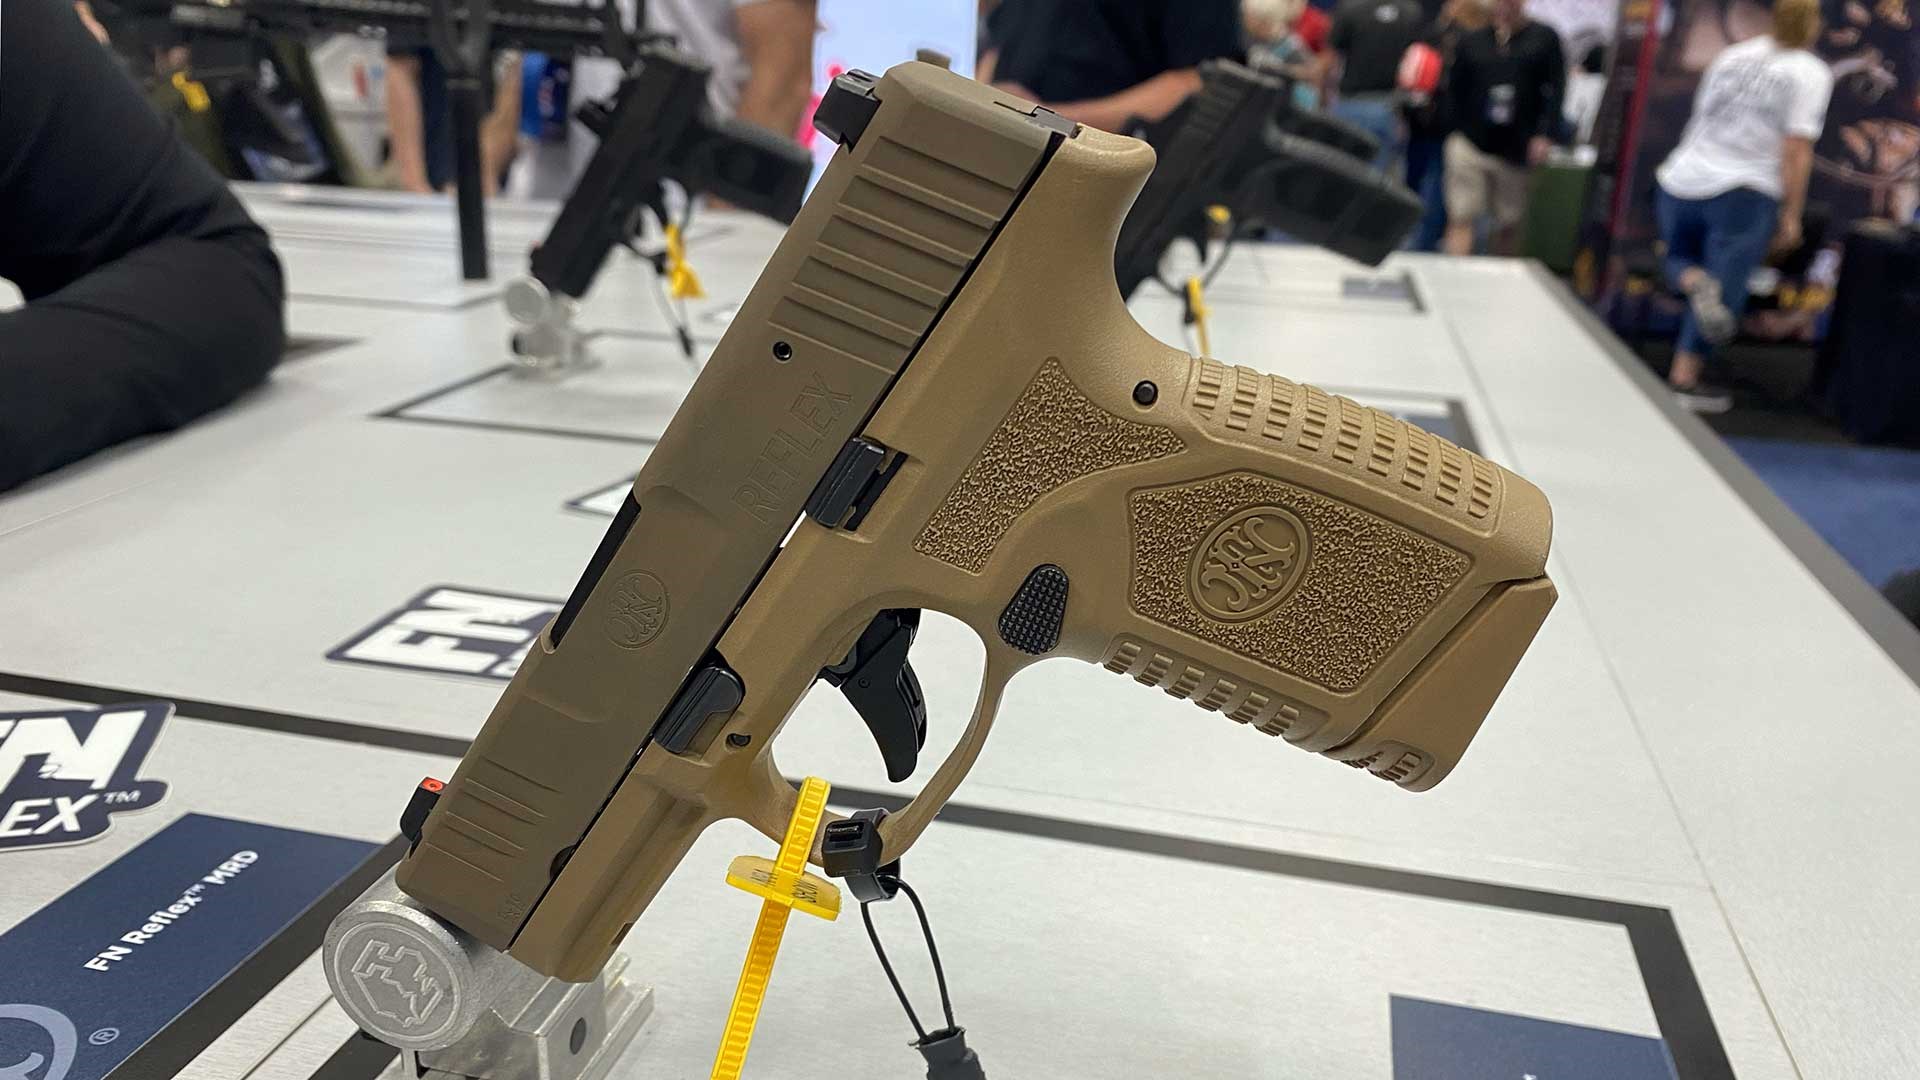 A tan FN America Reflex pistol shown on a display at the 2023 NRA Annual Meeting & Exhibits